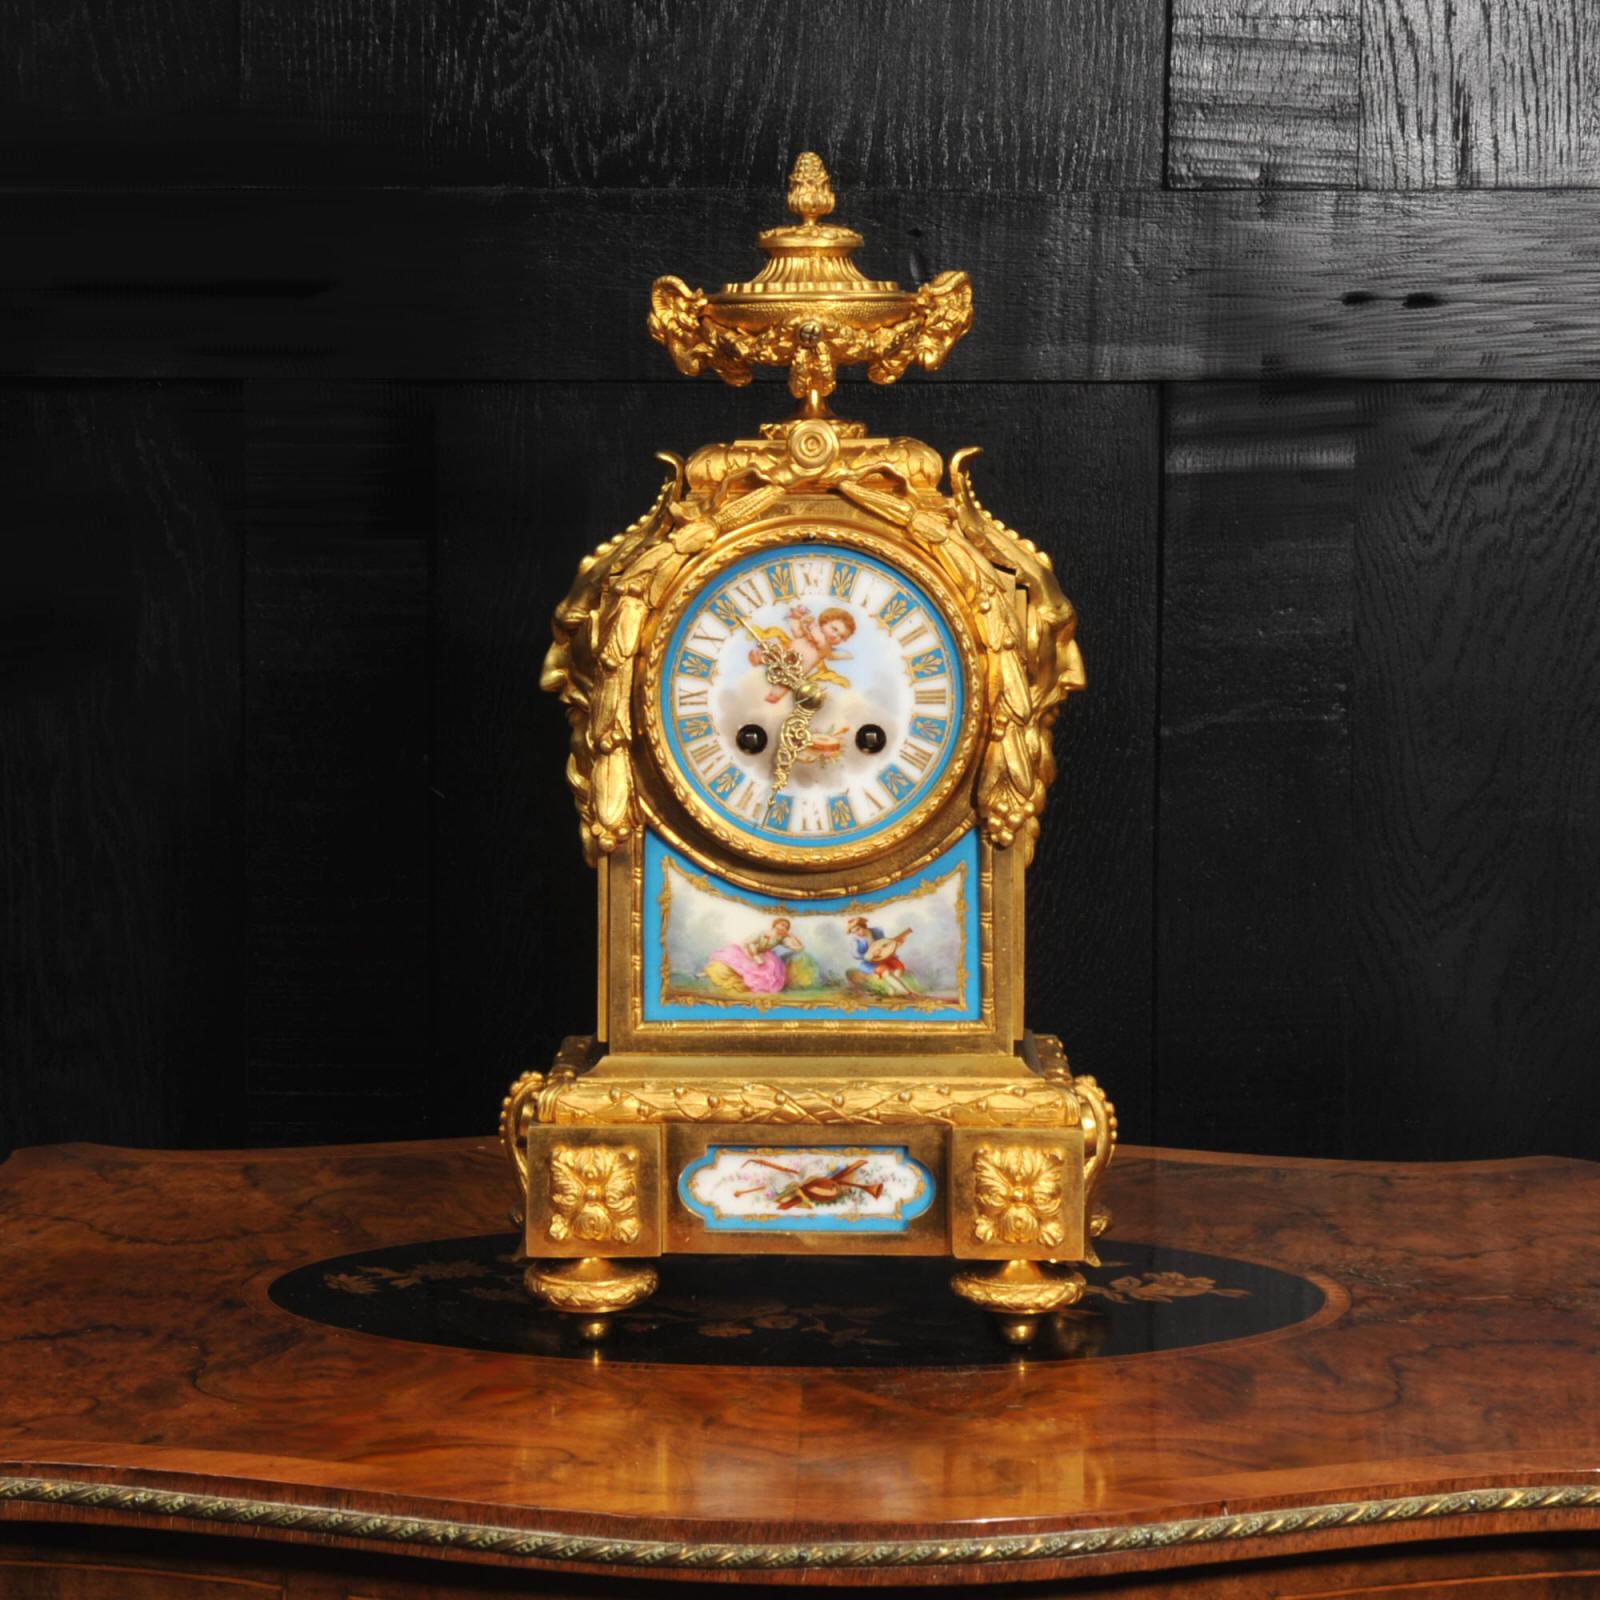 A fine and early clock by Japy Fils. It is beautifully made in ormolu (finely gilded bronze doré) and mounted with exquisite Sèvres style porcelain with a blue celeste ground. The panel below the dial features an exquisite scene of a couple in a